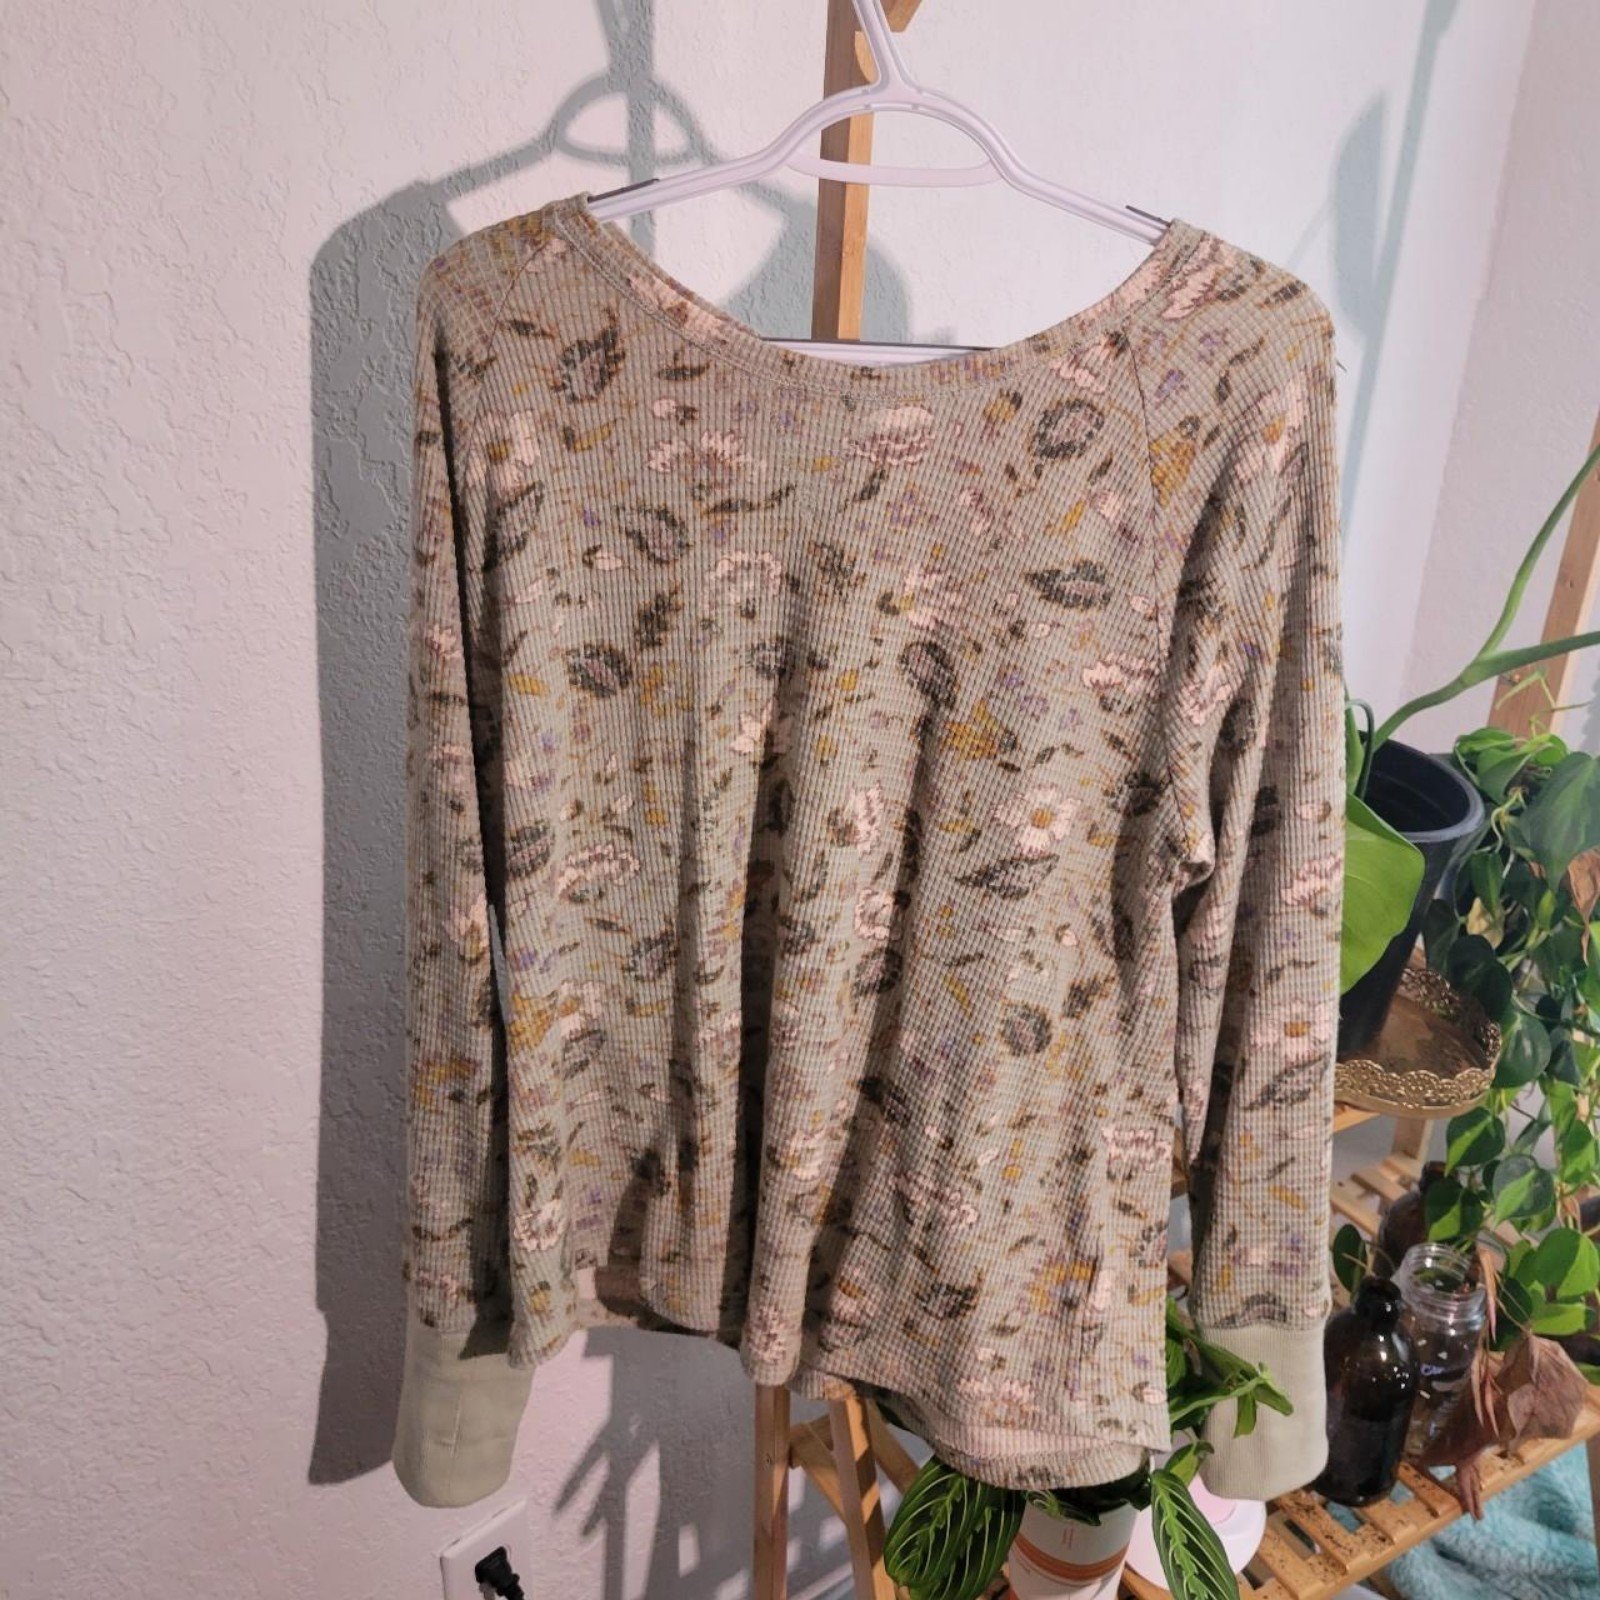 Discounted Light green floral thermal style top fJJsltU